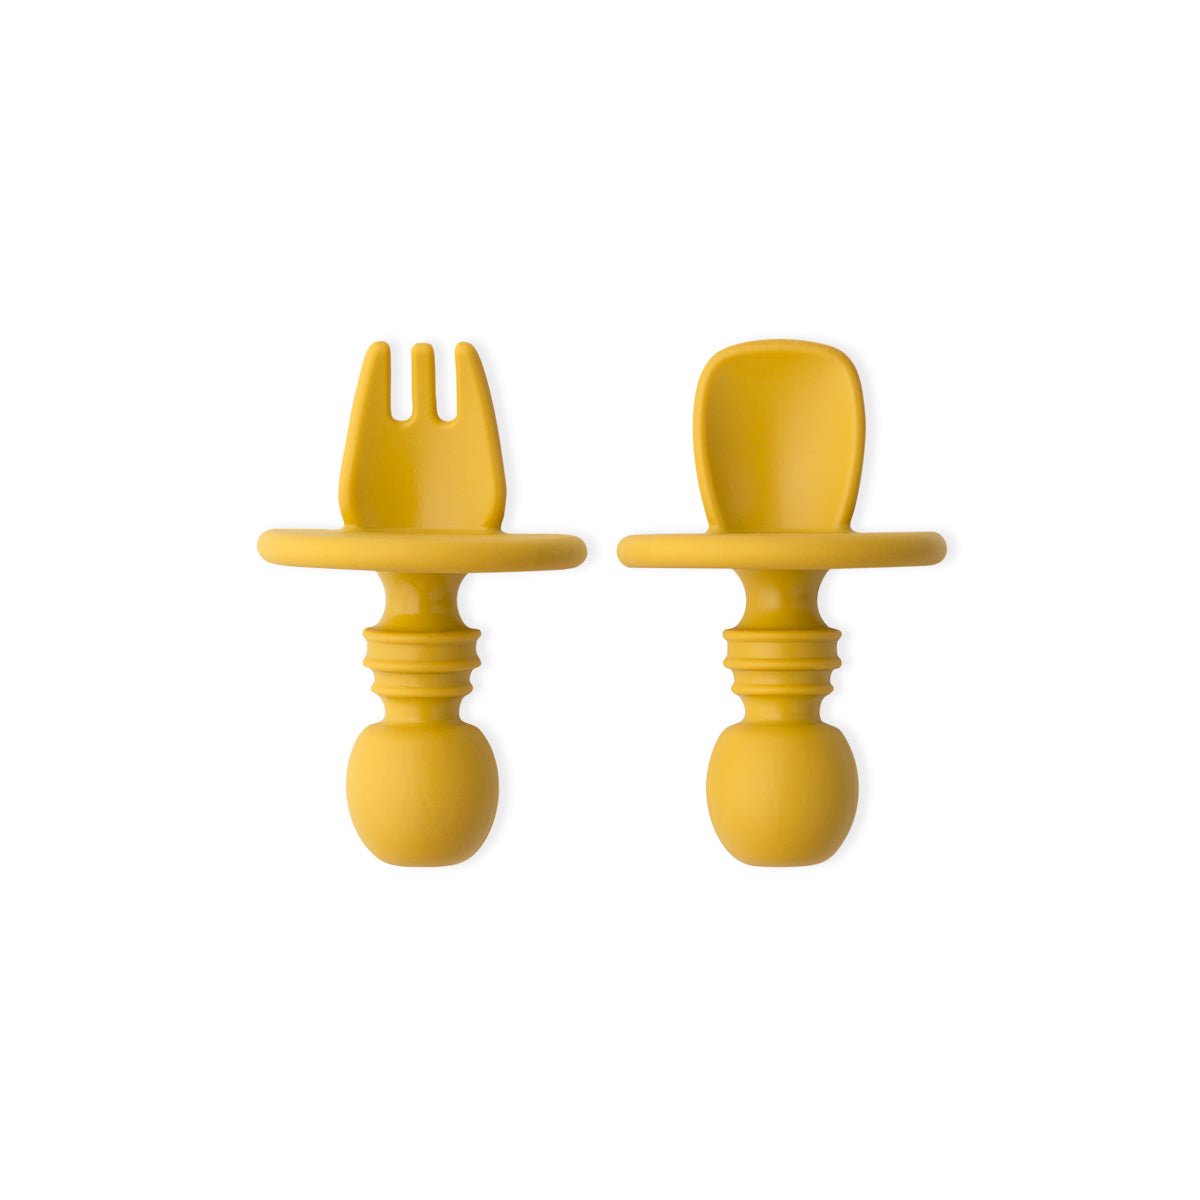 Small Fork and Spoon Set - Mustard